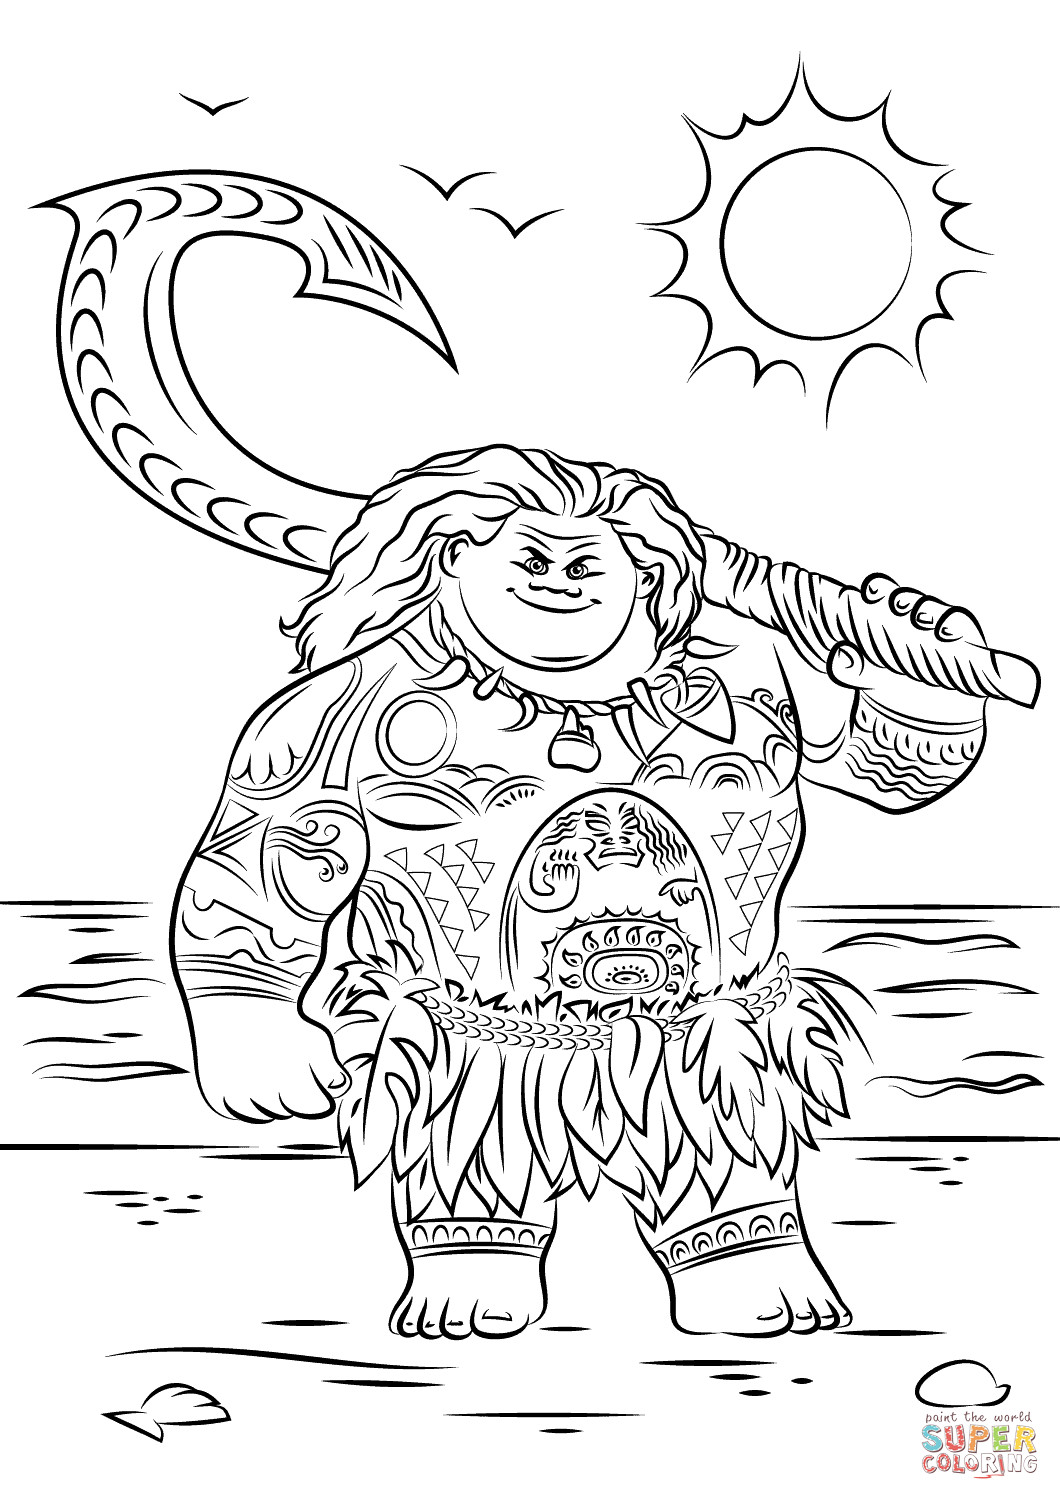 Moana Coloring Pages Printable
 Maui from Moana coloring page